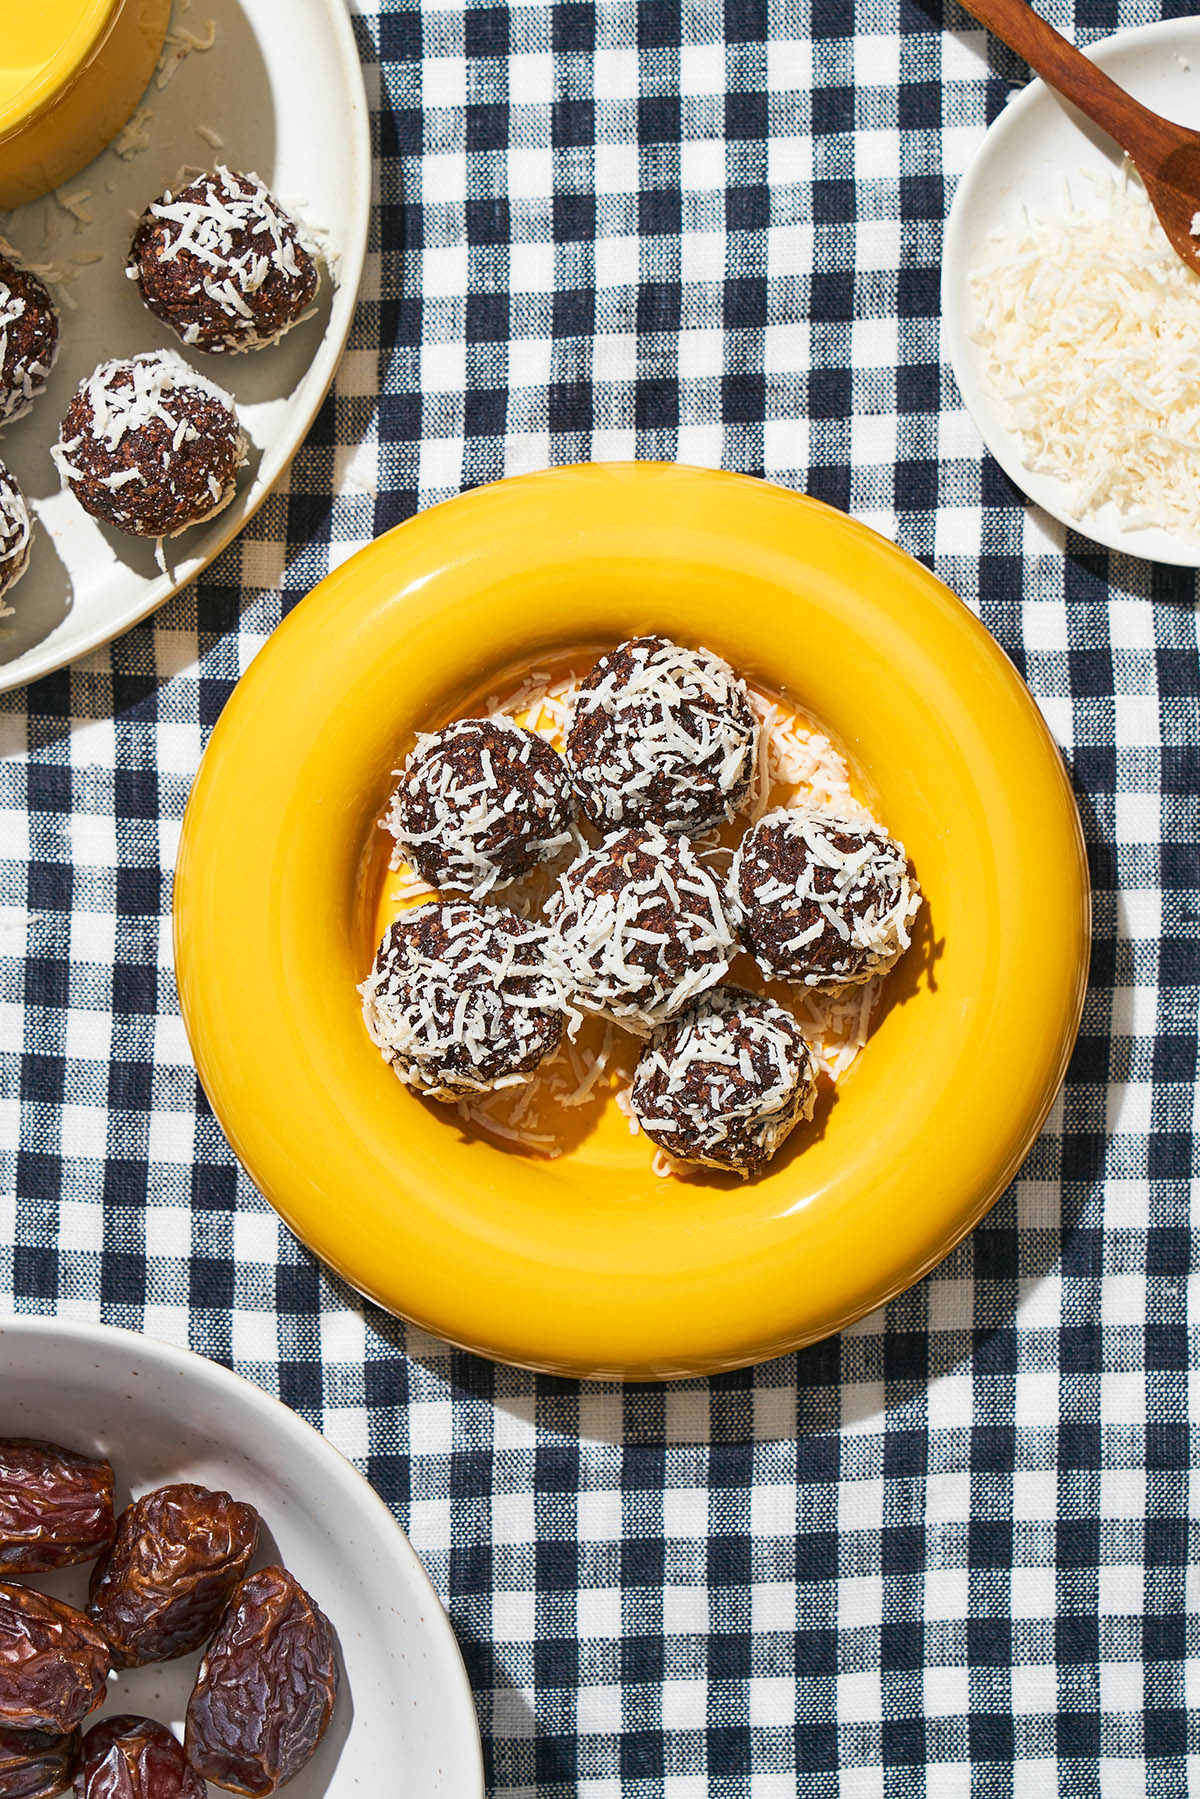 Chocolate balls rolled in coconut on a picnic blanket.